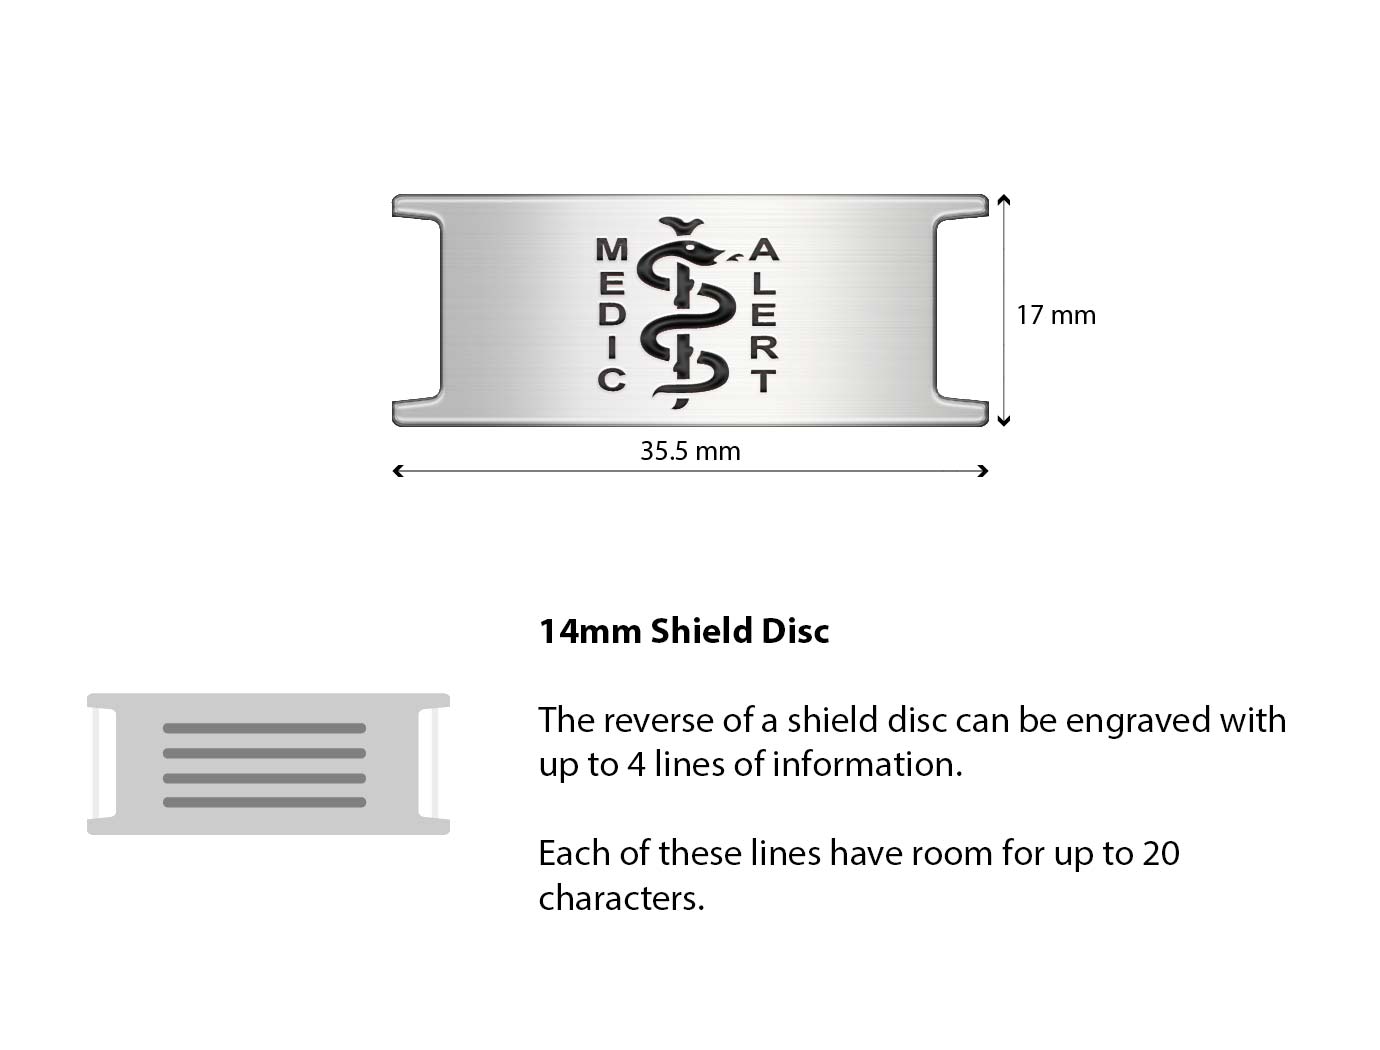 Diagram of the MedicAlert stainless steel 14mm shield disc with measurements and descriptions of the engraving specifications